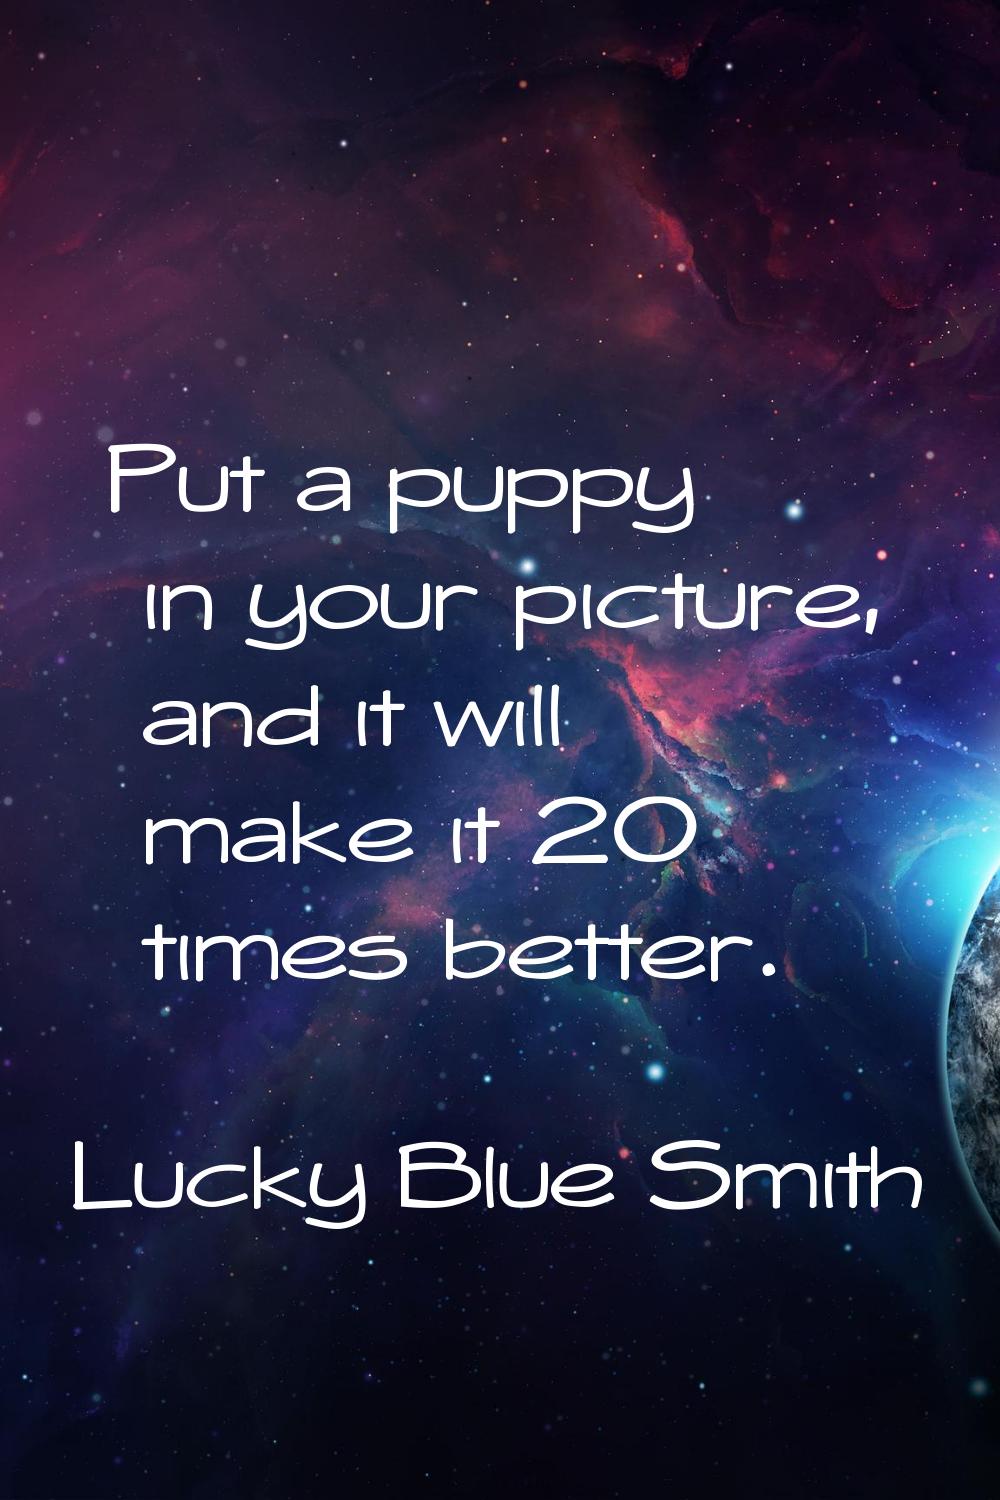 Put a puppy in your picture, and it will make it 20 times better.